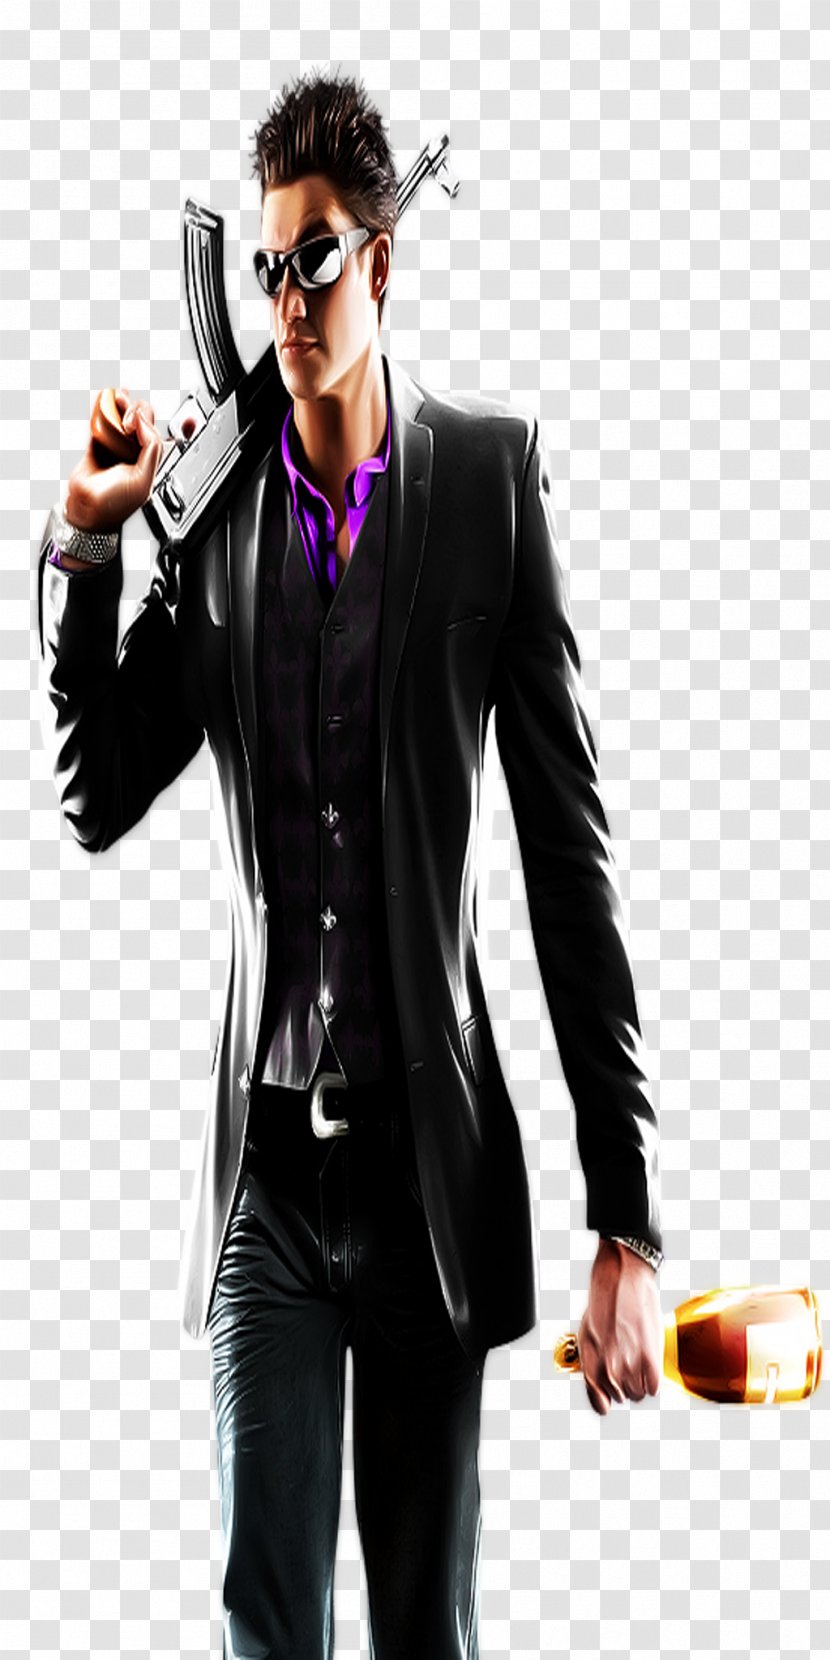 Saints Row: The Third Row IV 2 Video Game Boss - Character - Rowing Transparent PNG